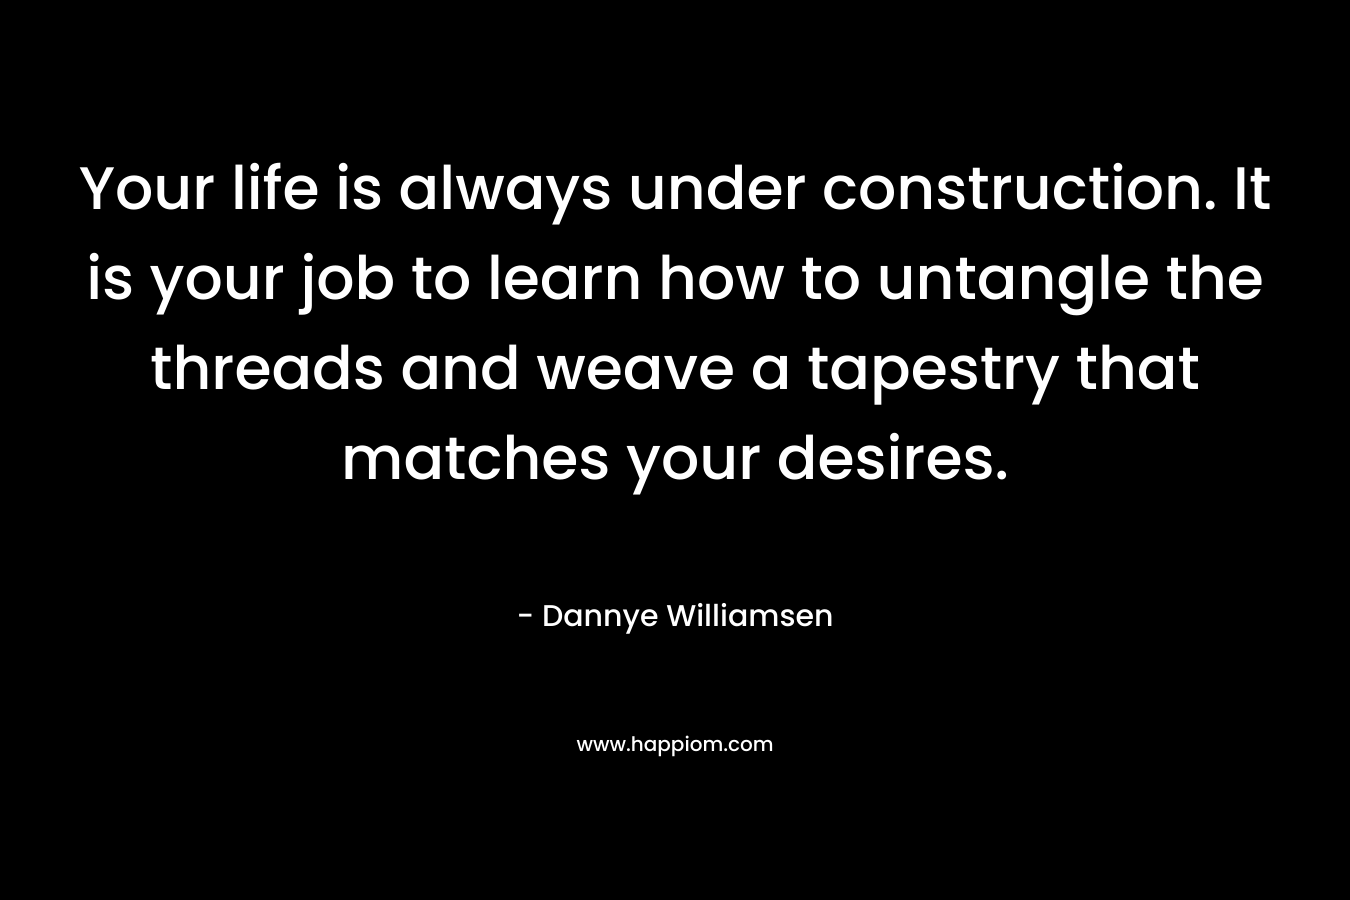 Your life is always under construction. It is your job to learn how to untangle the threads and weave a tapestry that matches your desires. – Dannye Williamsen